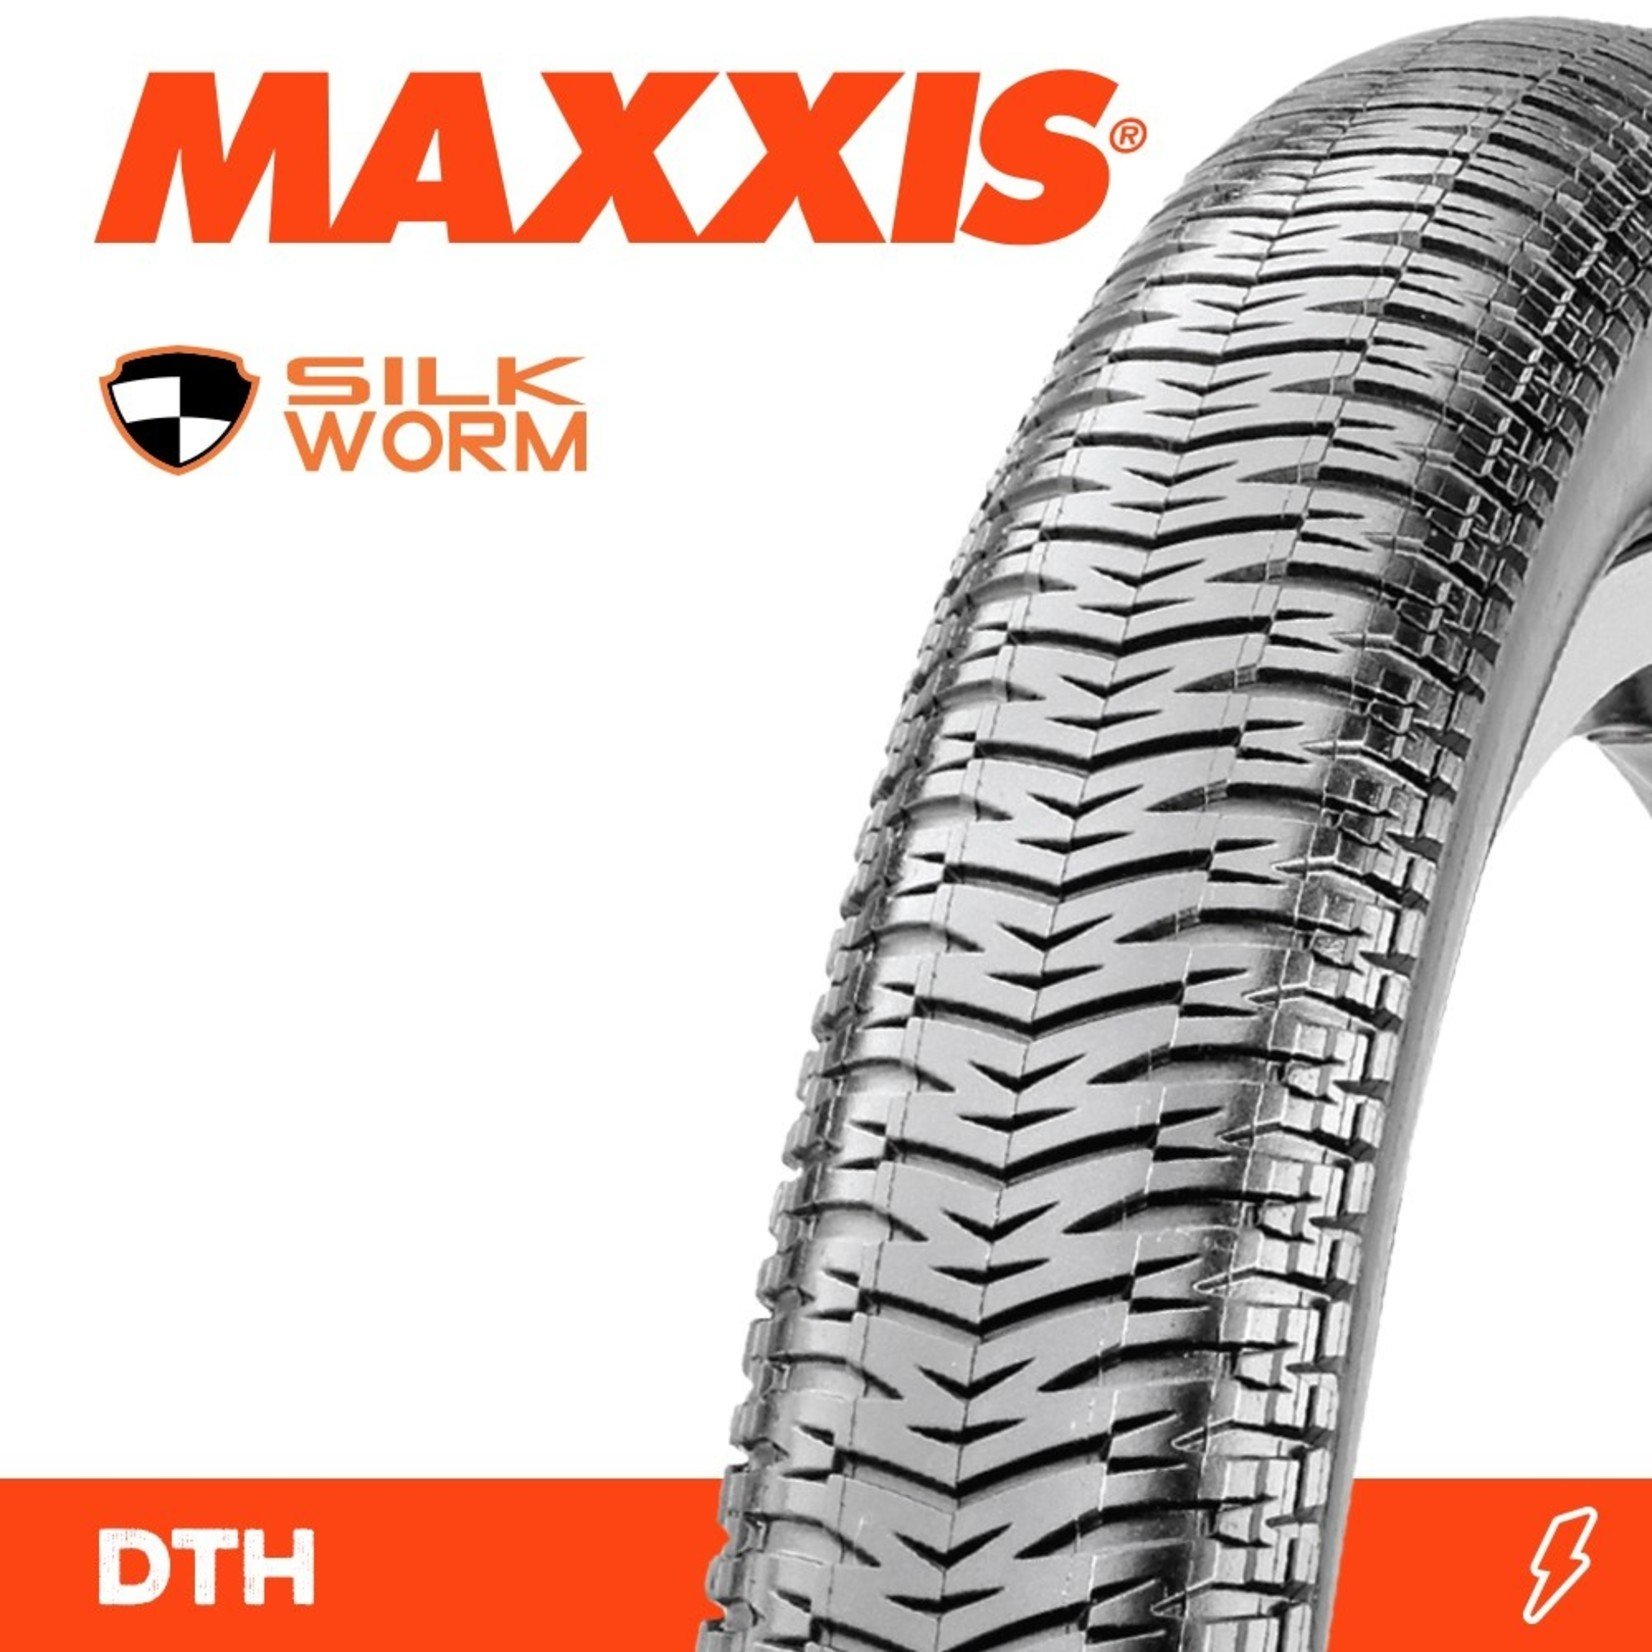 Maxxis Maxxis, Tyre DTH 20 x 1-3/8  Silkworm Wire 120TPI Black